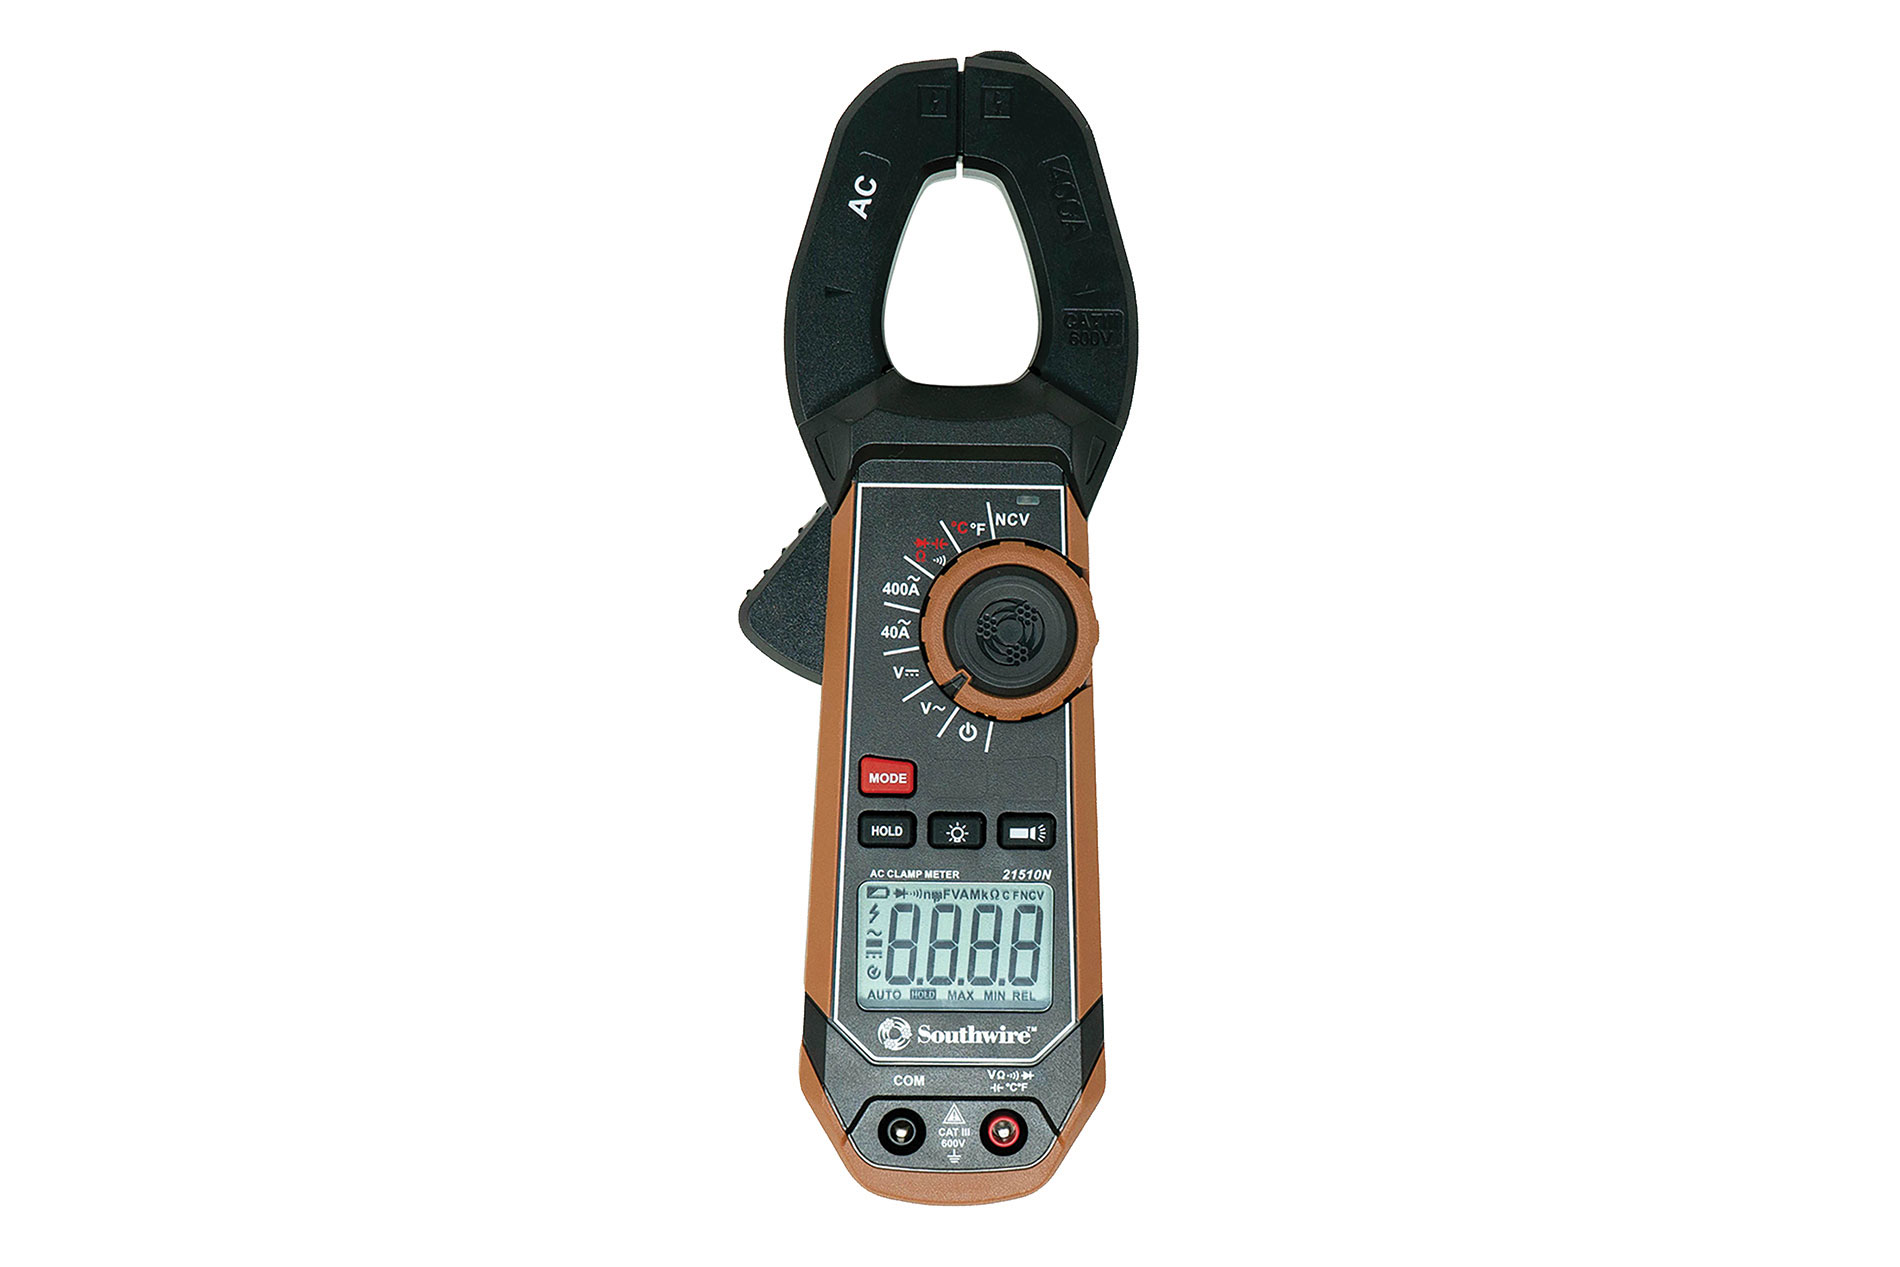 Gray and brown clamp meter. Image by Southwire.